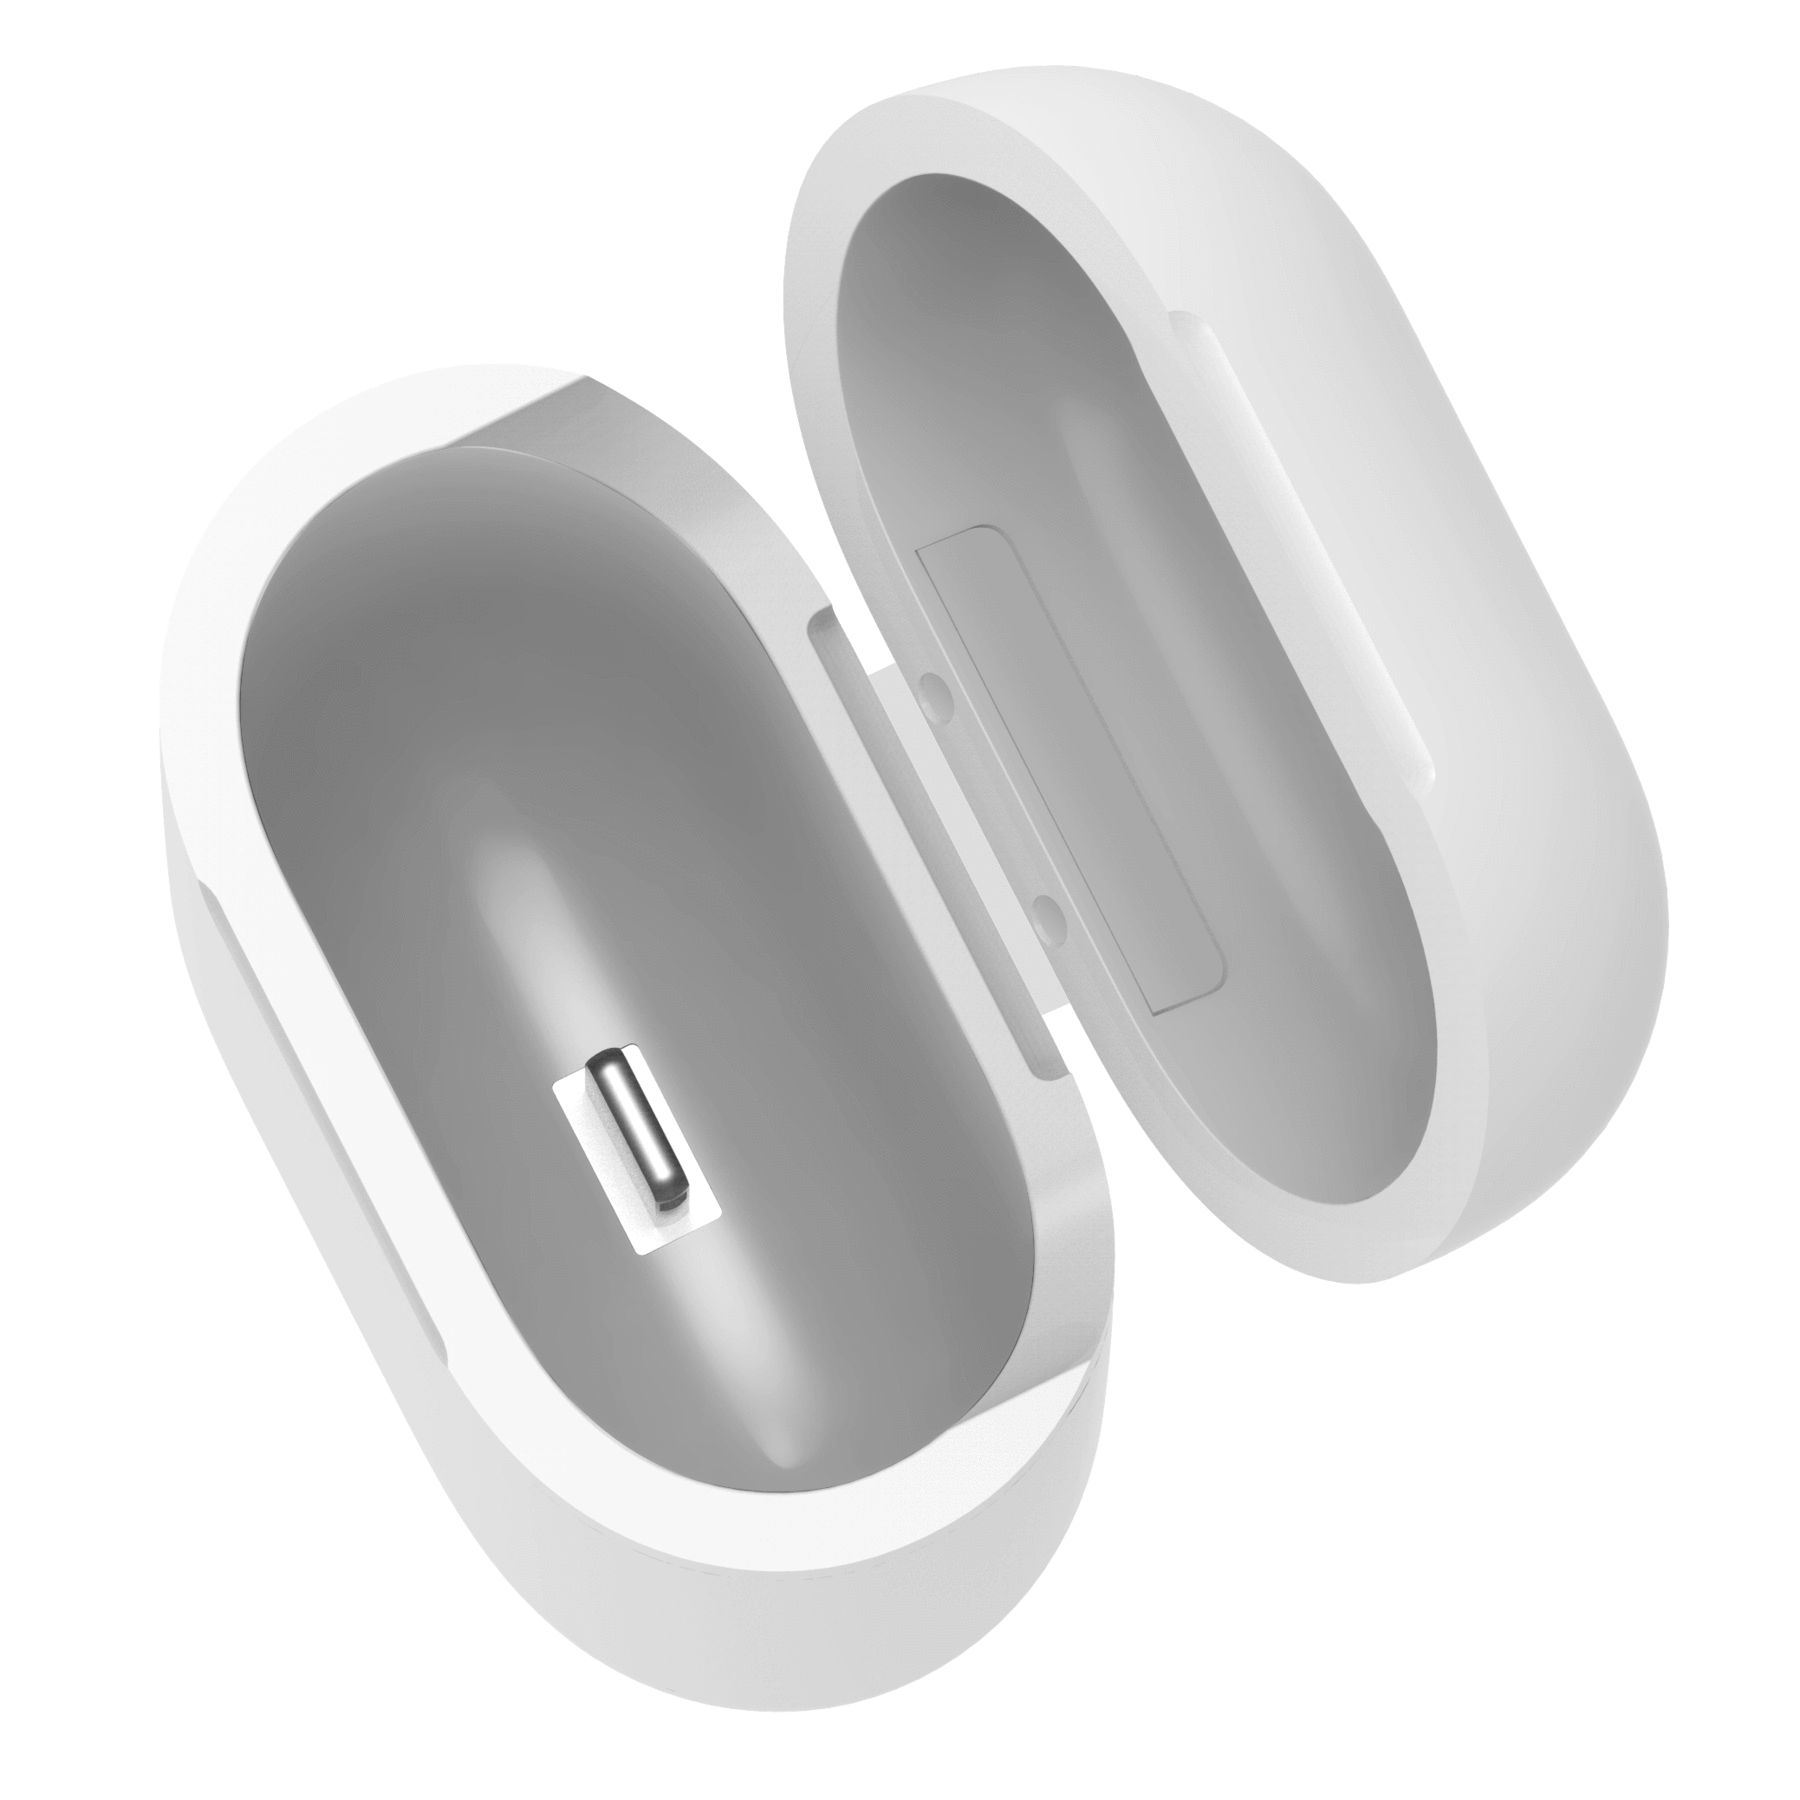 HyperJuice Wireless Charging Case AirPods - kite+key, Rutgers Store